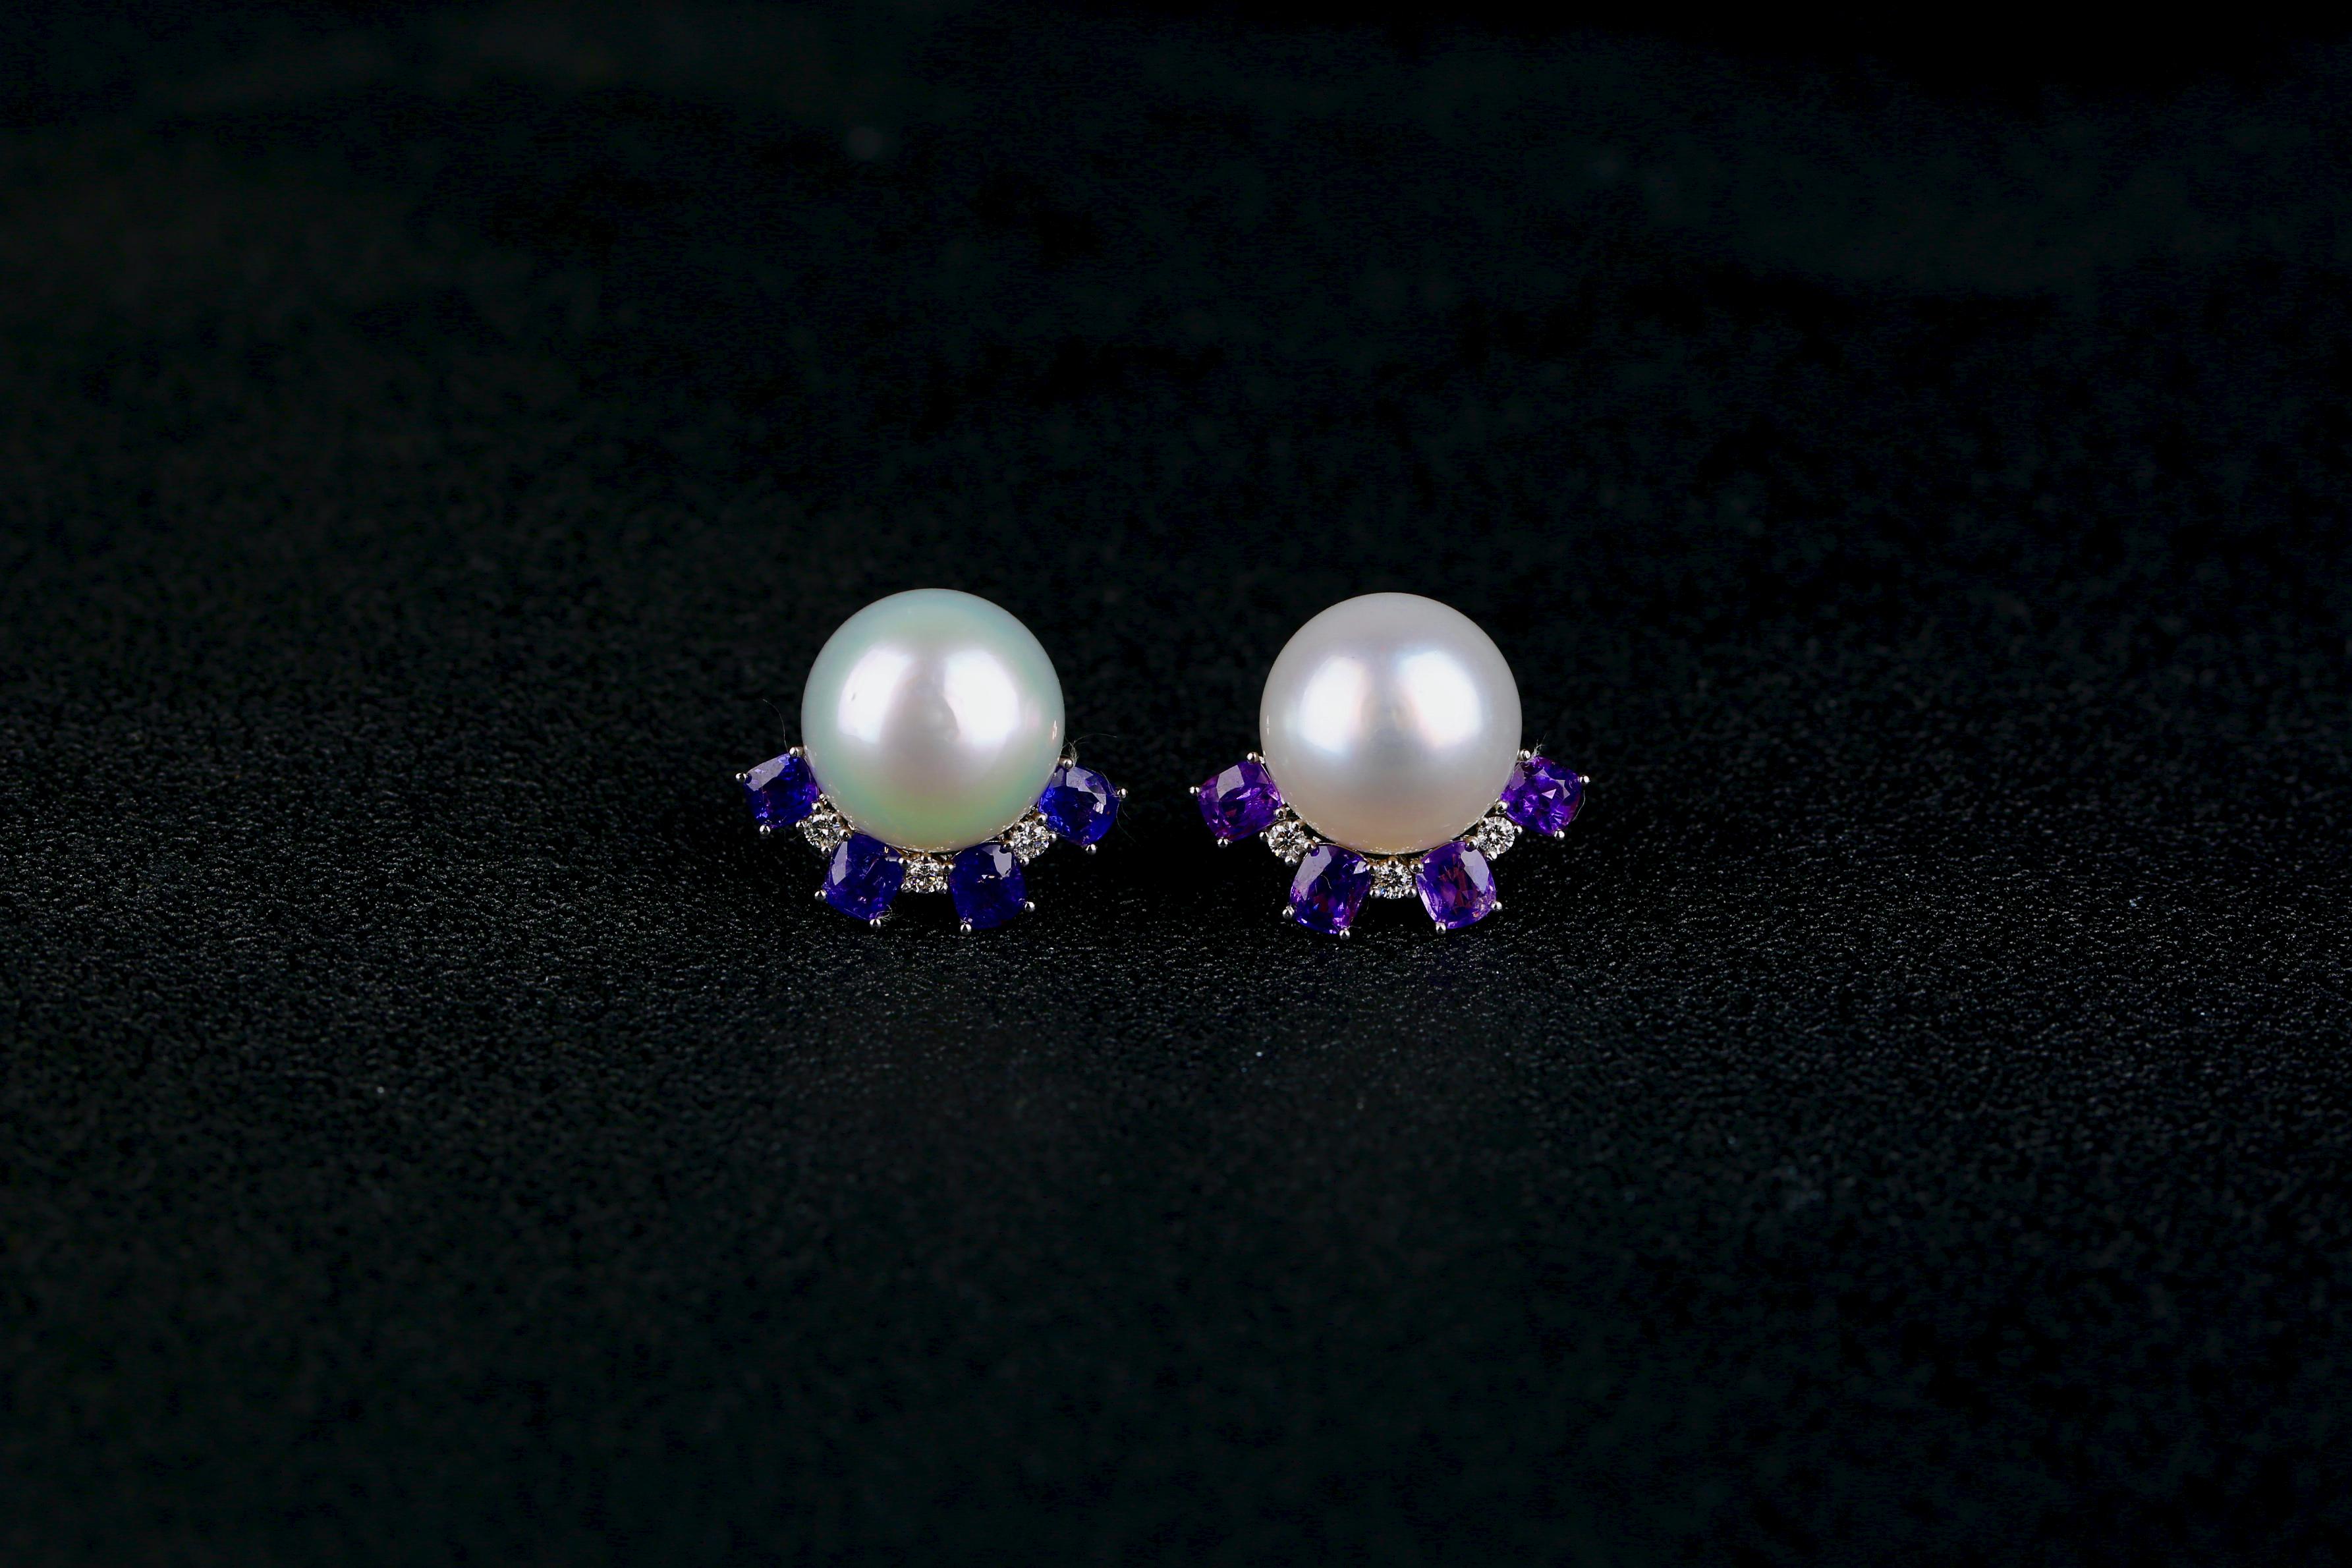 A pair of 14 mm South Sea Pearl, Purple Sapphire and Diamond Earring in 18k White Gold
It consists of a total of 3.21 ct purple sapphire
Total natural diamond weight 0.21 ct , The Colour of the Diamond is Approximately E/F with VS Clarity
